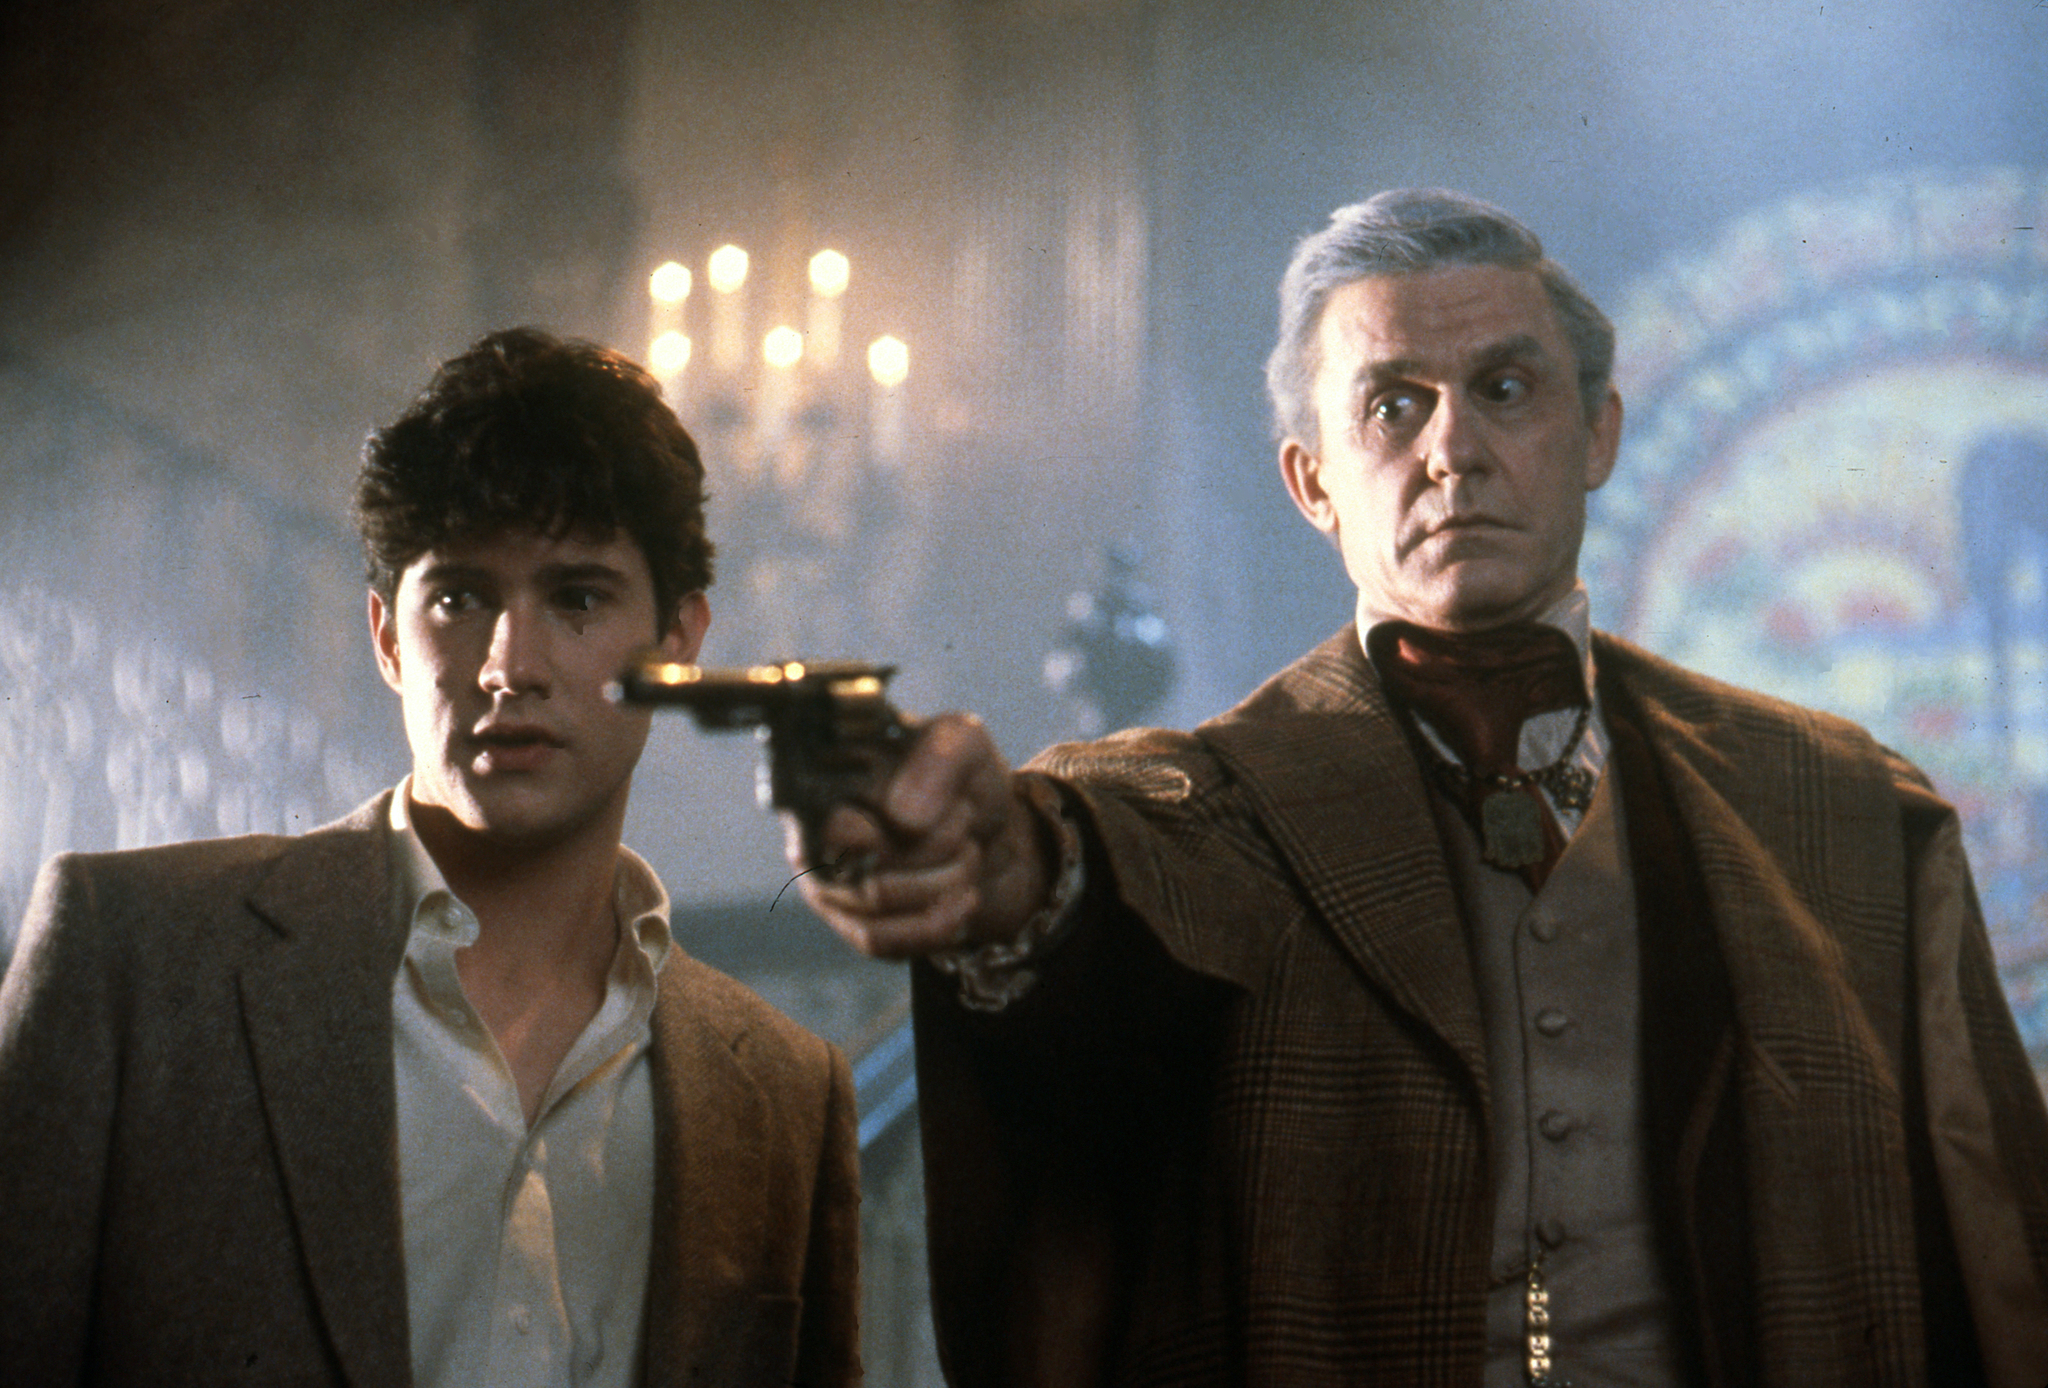 Still of Roddy McDowall and William Ragsdale in Fright Night (1985)